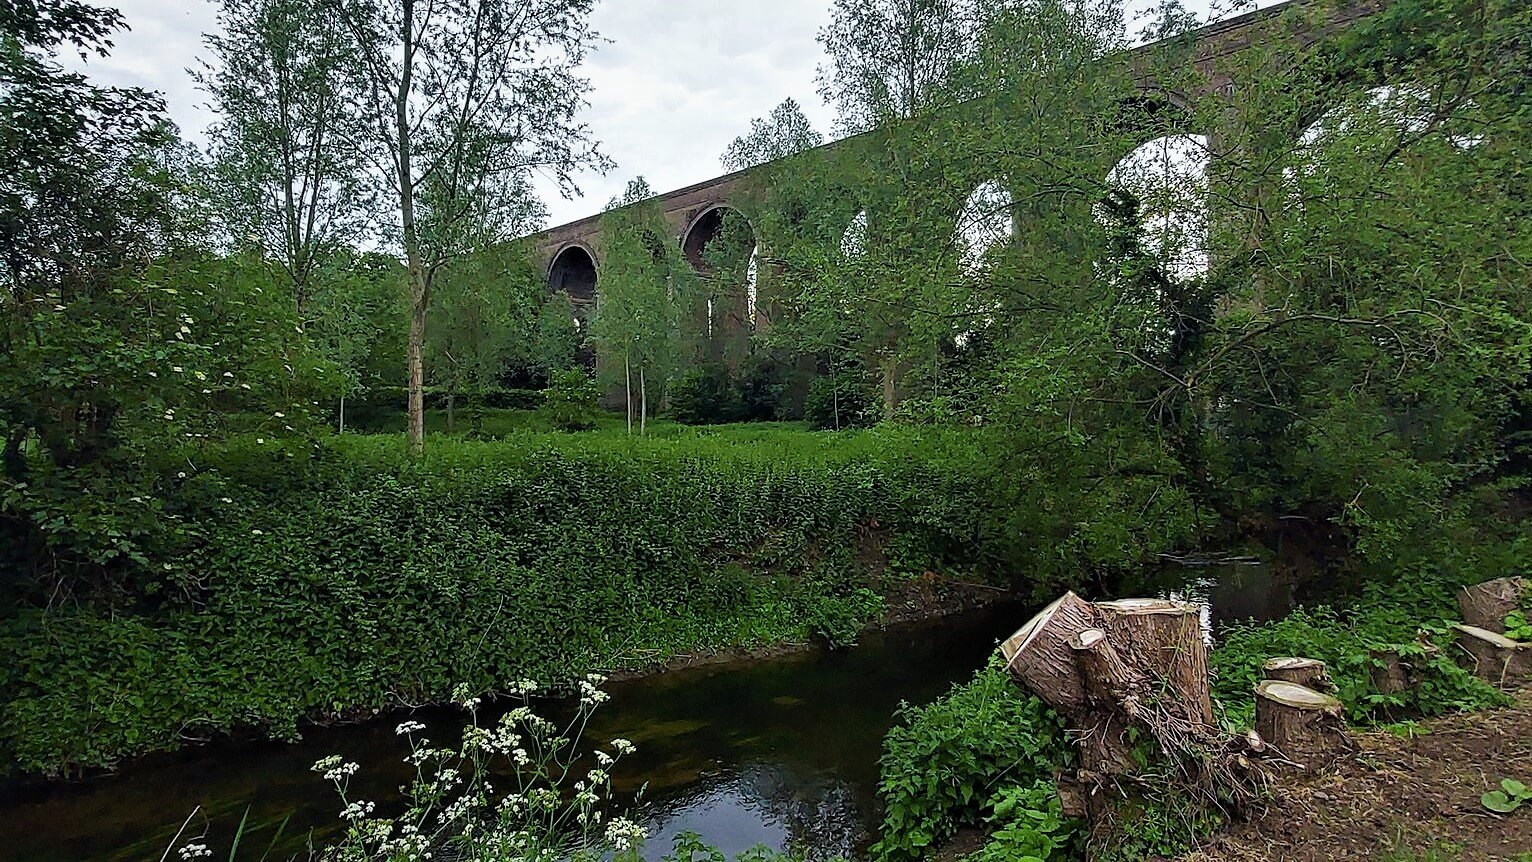 the arches of the chappel viaduct viewed across the river colne from the pub garden of the Swan Inn